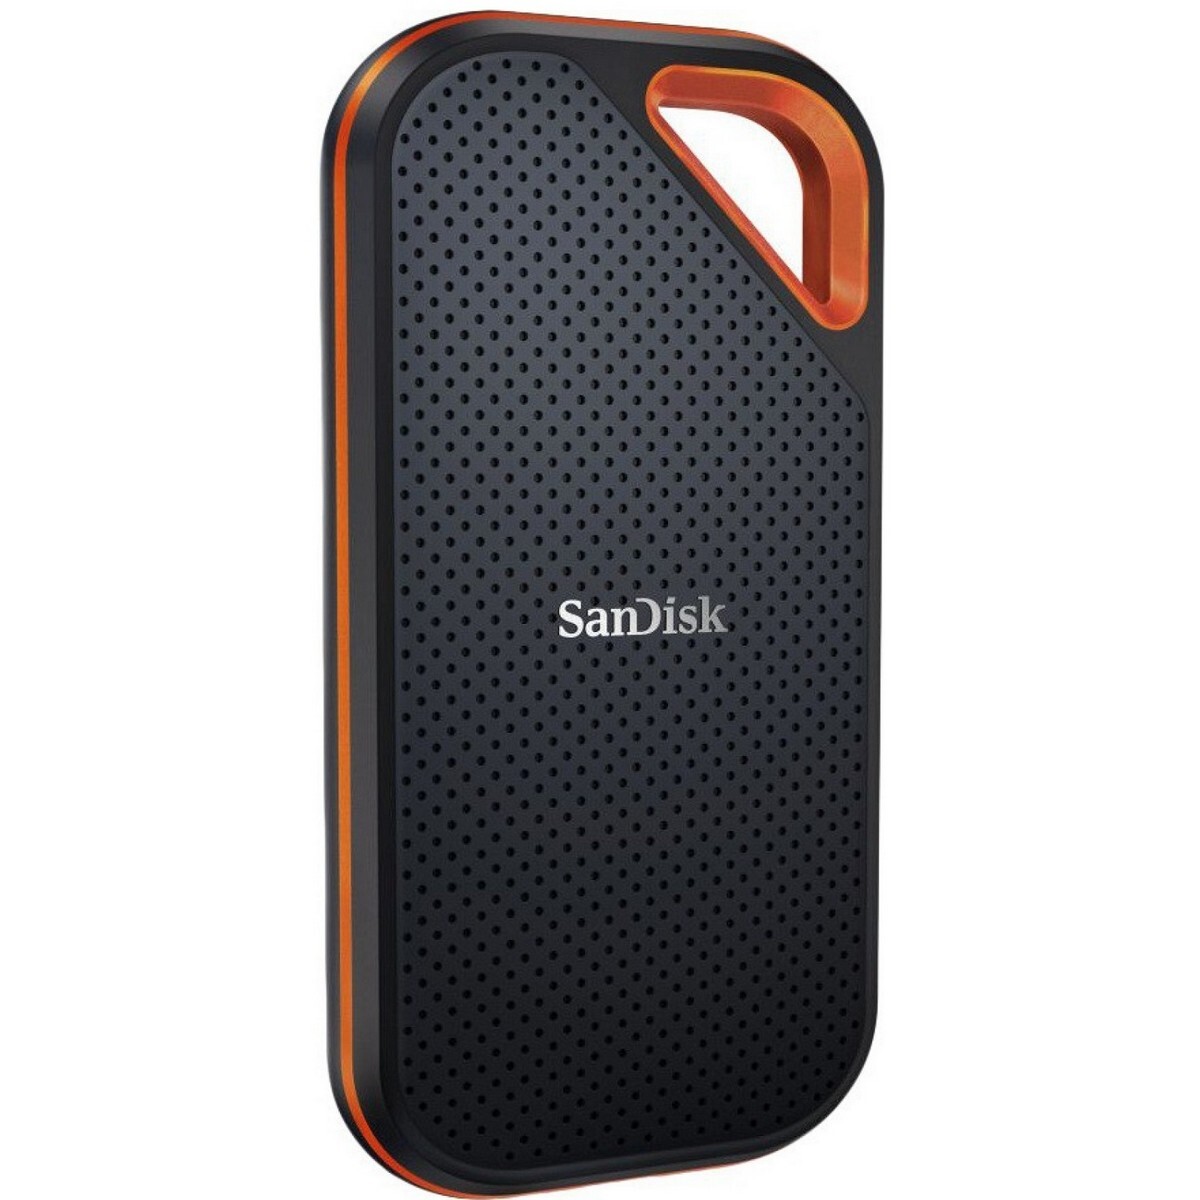 SanDisk 2TB Extreme Pro Portable Solid State Drive 2000MB/s